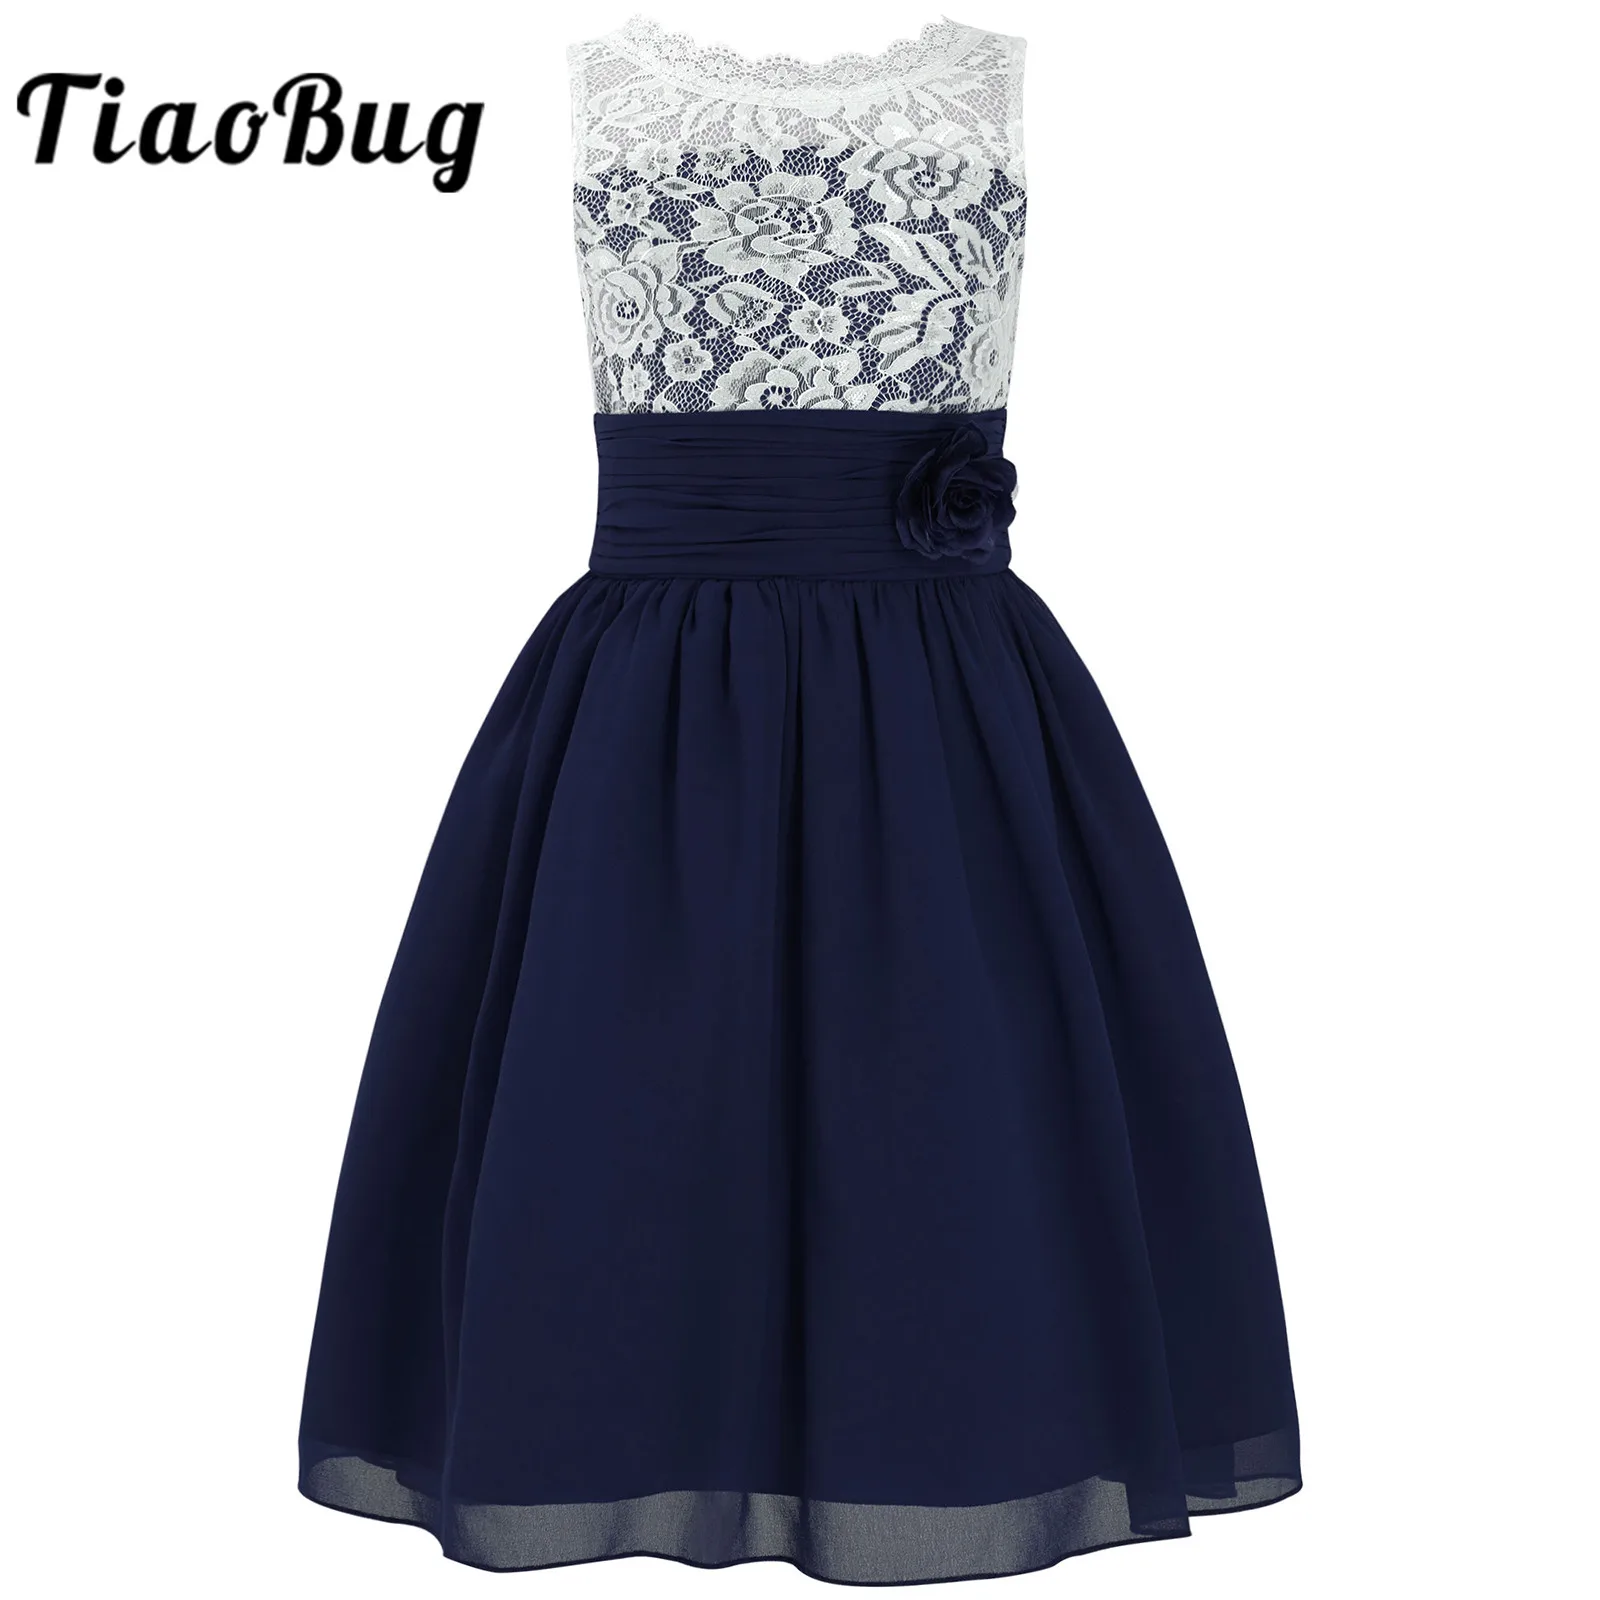 

Lace Patchwork Flower Girls Dress Chiffon Pleated Waist Kids Dresses Childrens Pageant Dress Wedding Party Dress Formal Clothes